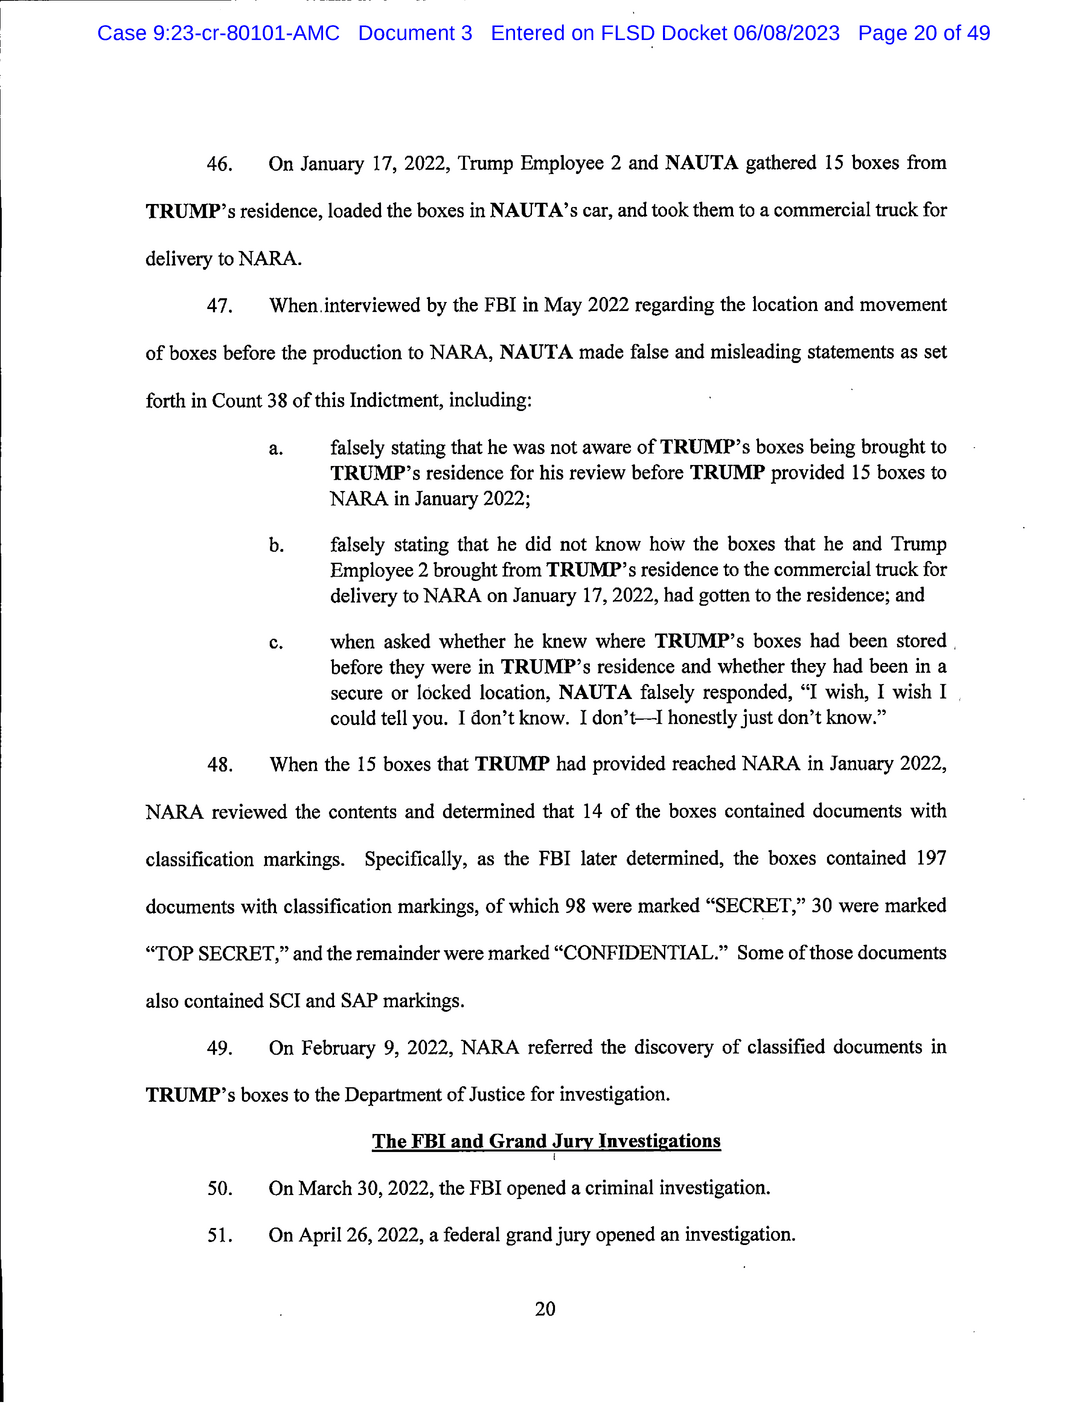 Page 20 of Donald Trump Classified Documents Indictment PDF document.